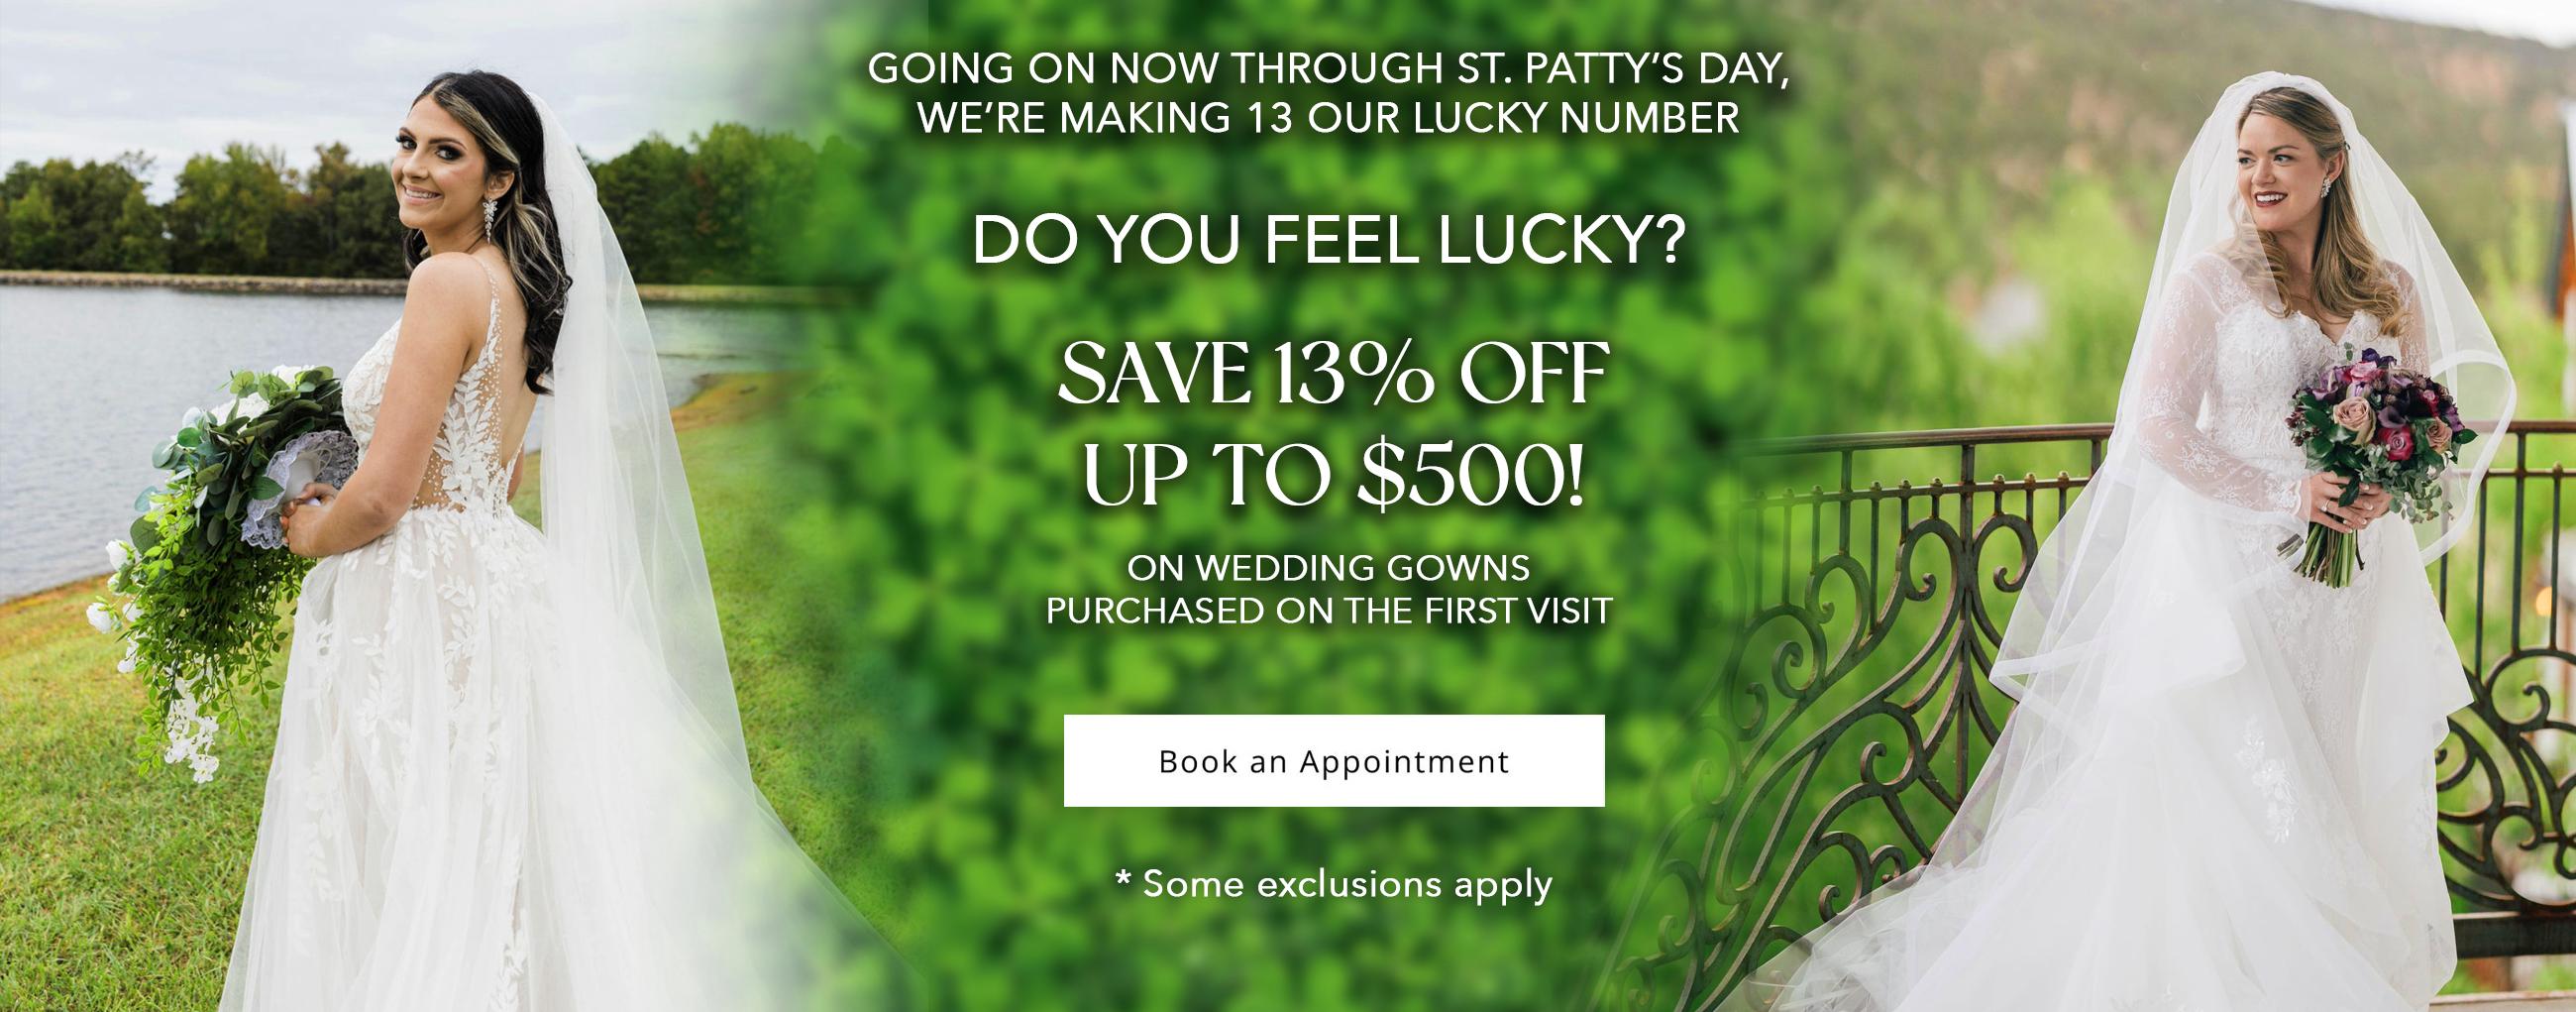 Now through St. Patty's Day, save 13% off up to $500!*